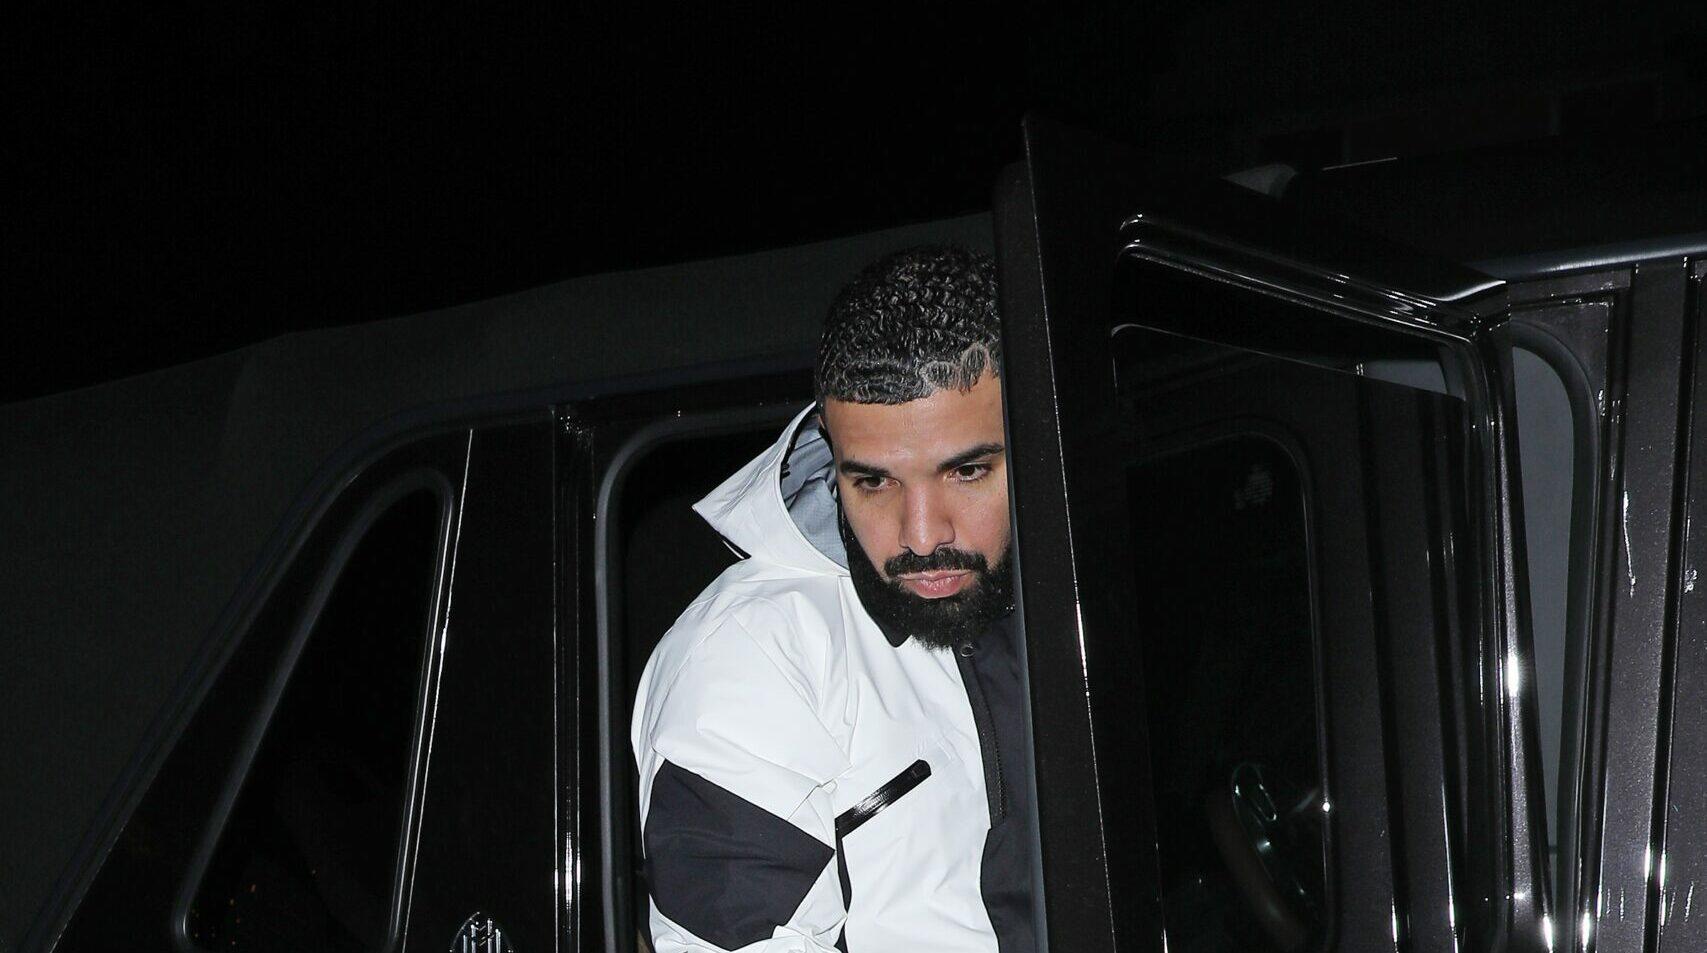 Rapper Drake arrives in style to the SHOREbar to party